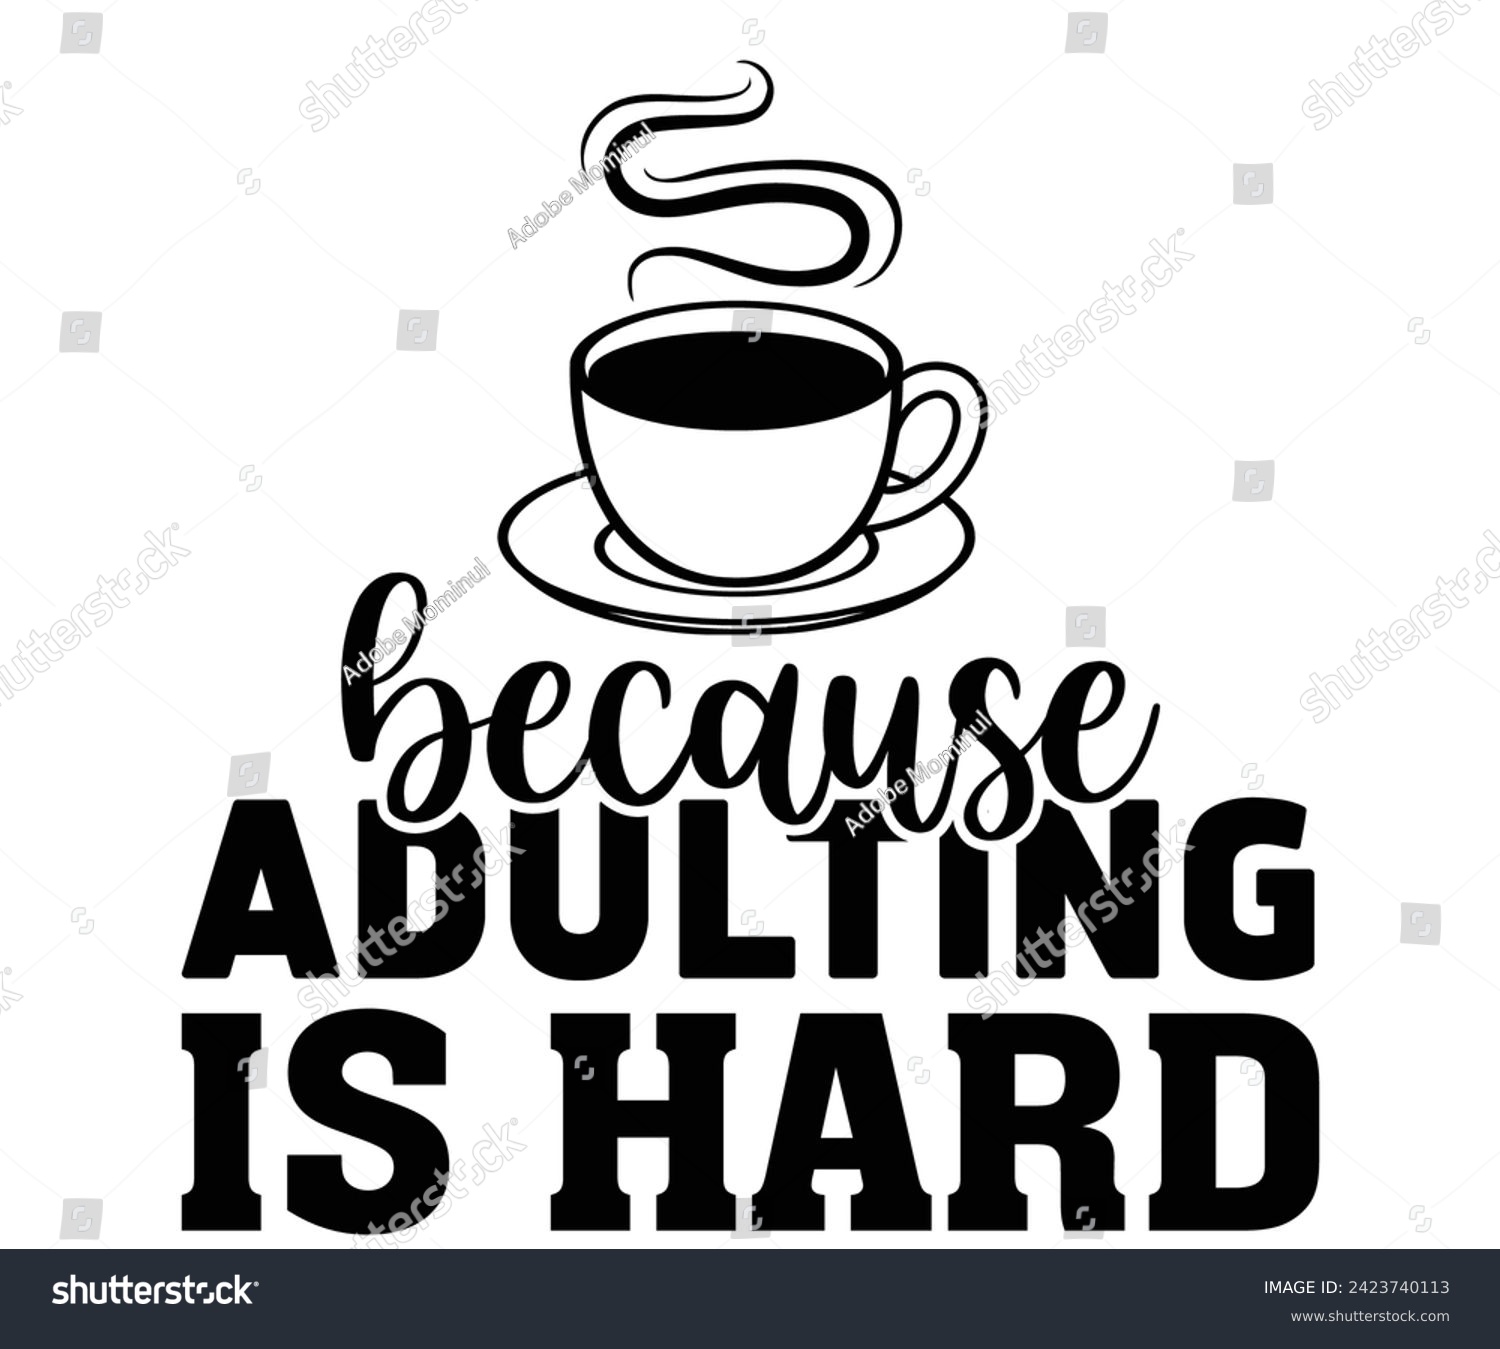 SVG of Coffee Because Adulting is Hard,Coffee Svg,Coffee Retro,Funny Coffee Sayings,Coffee Mug Svg,Coffee Cup Svg,Gift For Coffee,Coffee Lover,Caffeine Svg,Svg Cut File,Coffee Quotes,Sublimation Design, svg